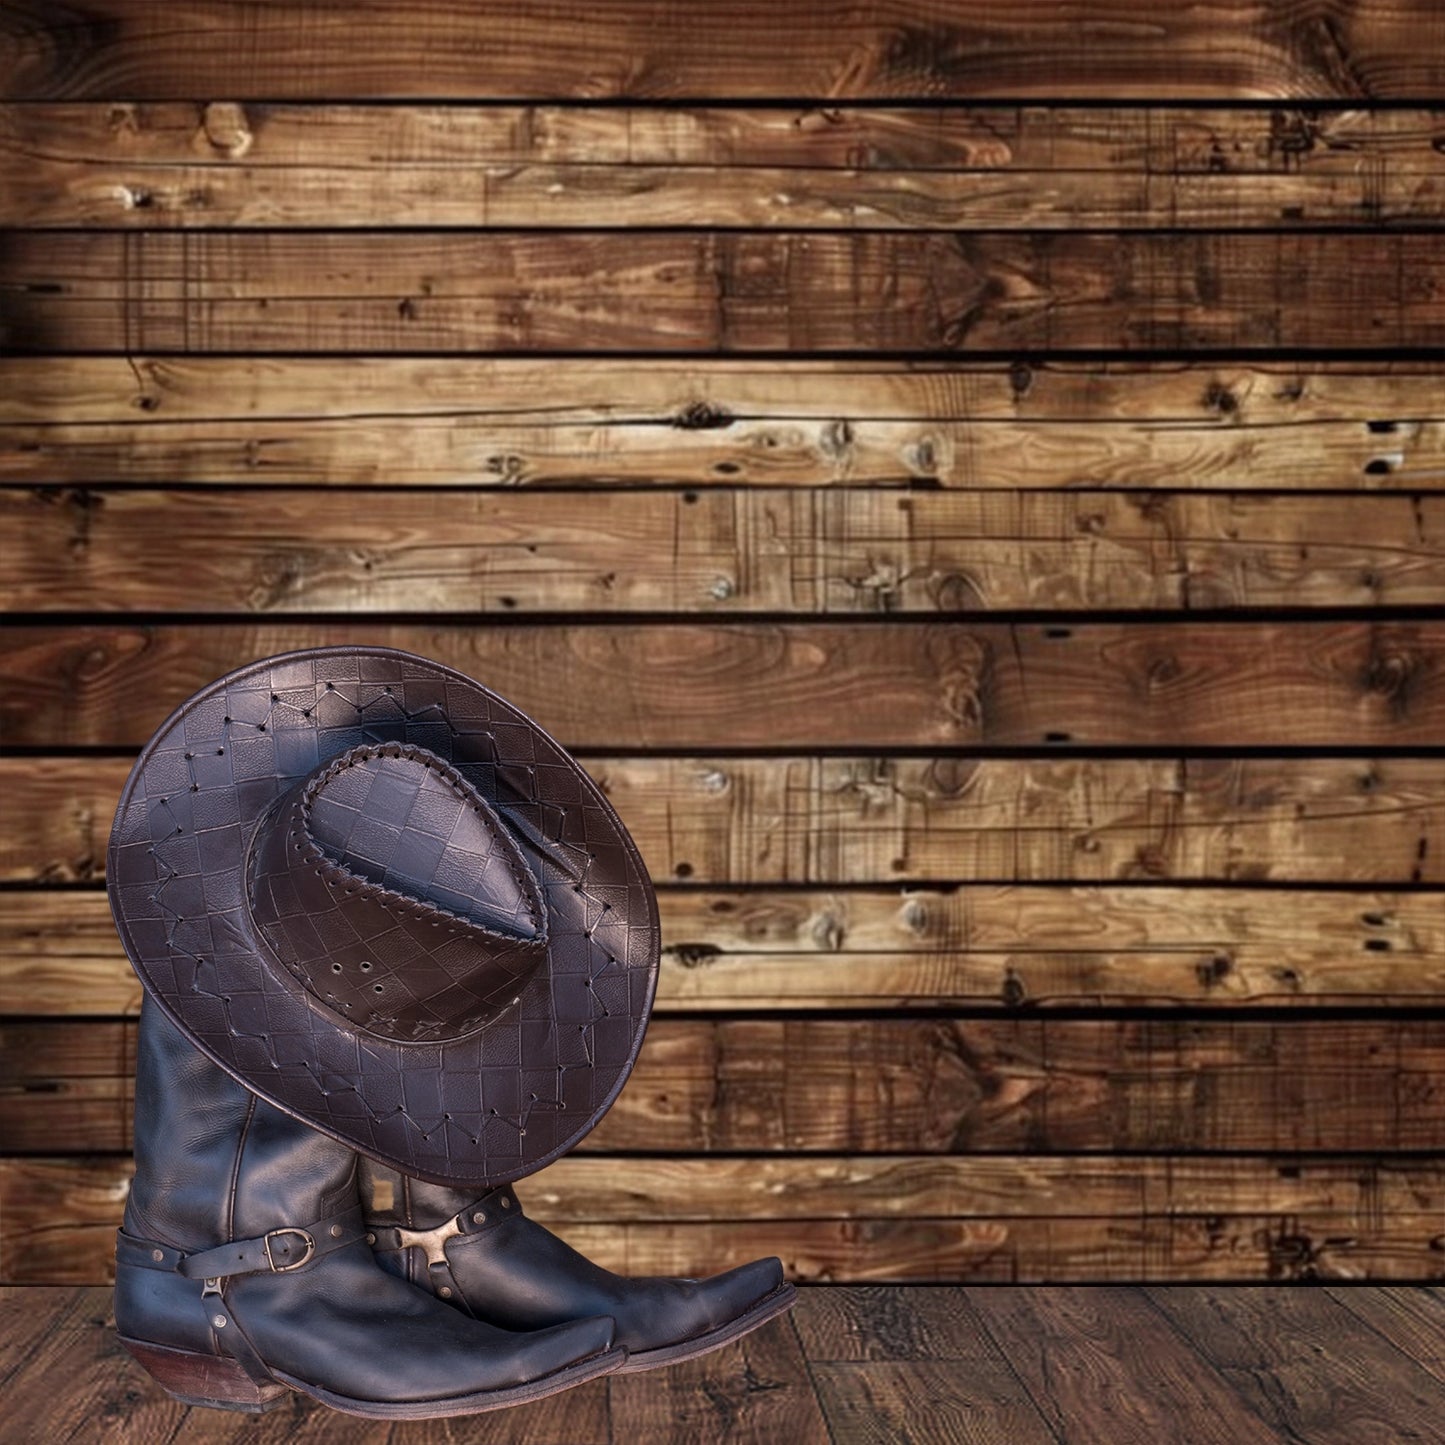 A brown cowboy hat and a pair of brown cowboy boots are placed on a wooden floor against the Wooden Boards Photography Wood Backdrop-ideasbackdrop by ideasbackdrop, giving the scene a nostalgic atmosphere.